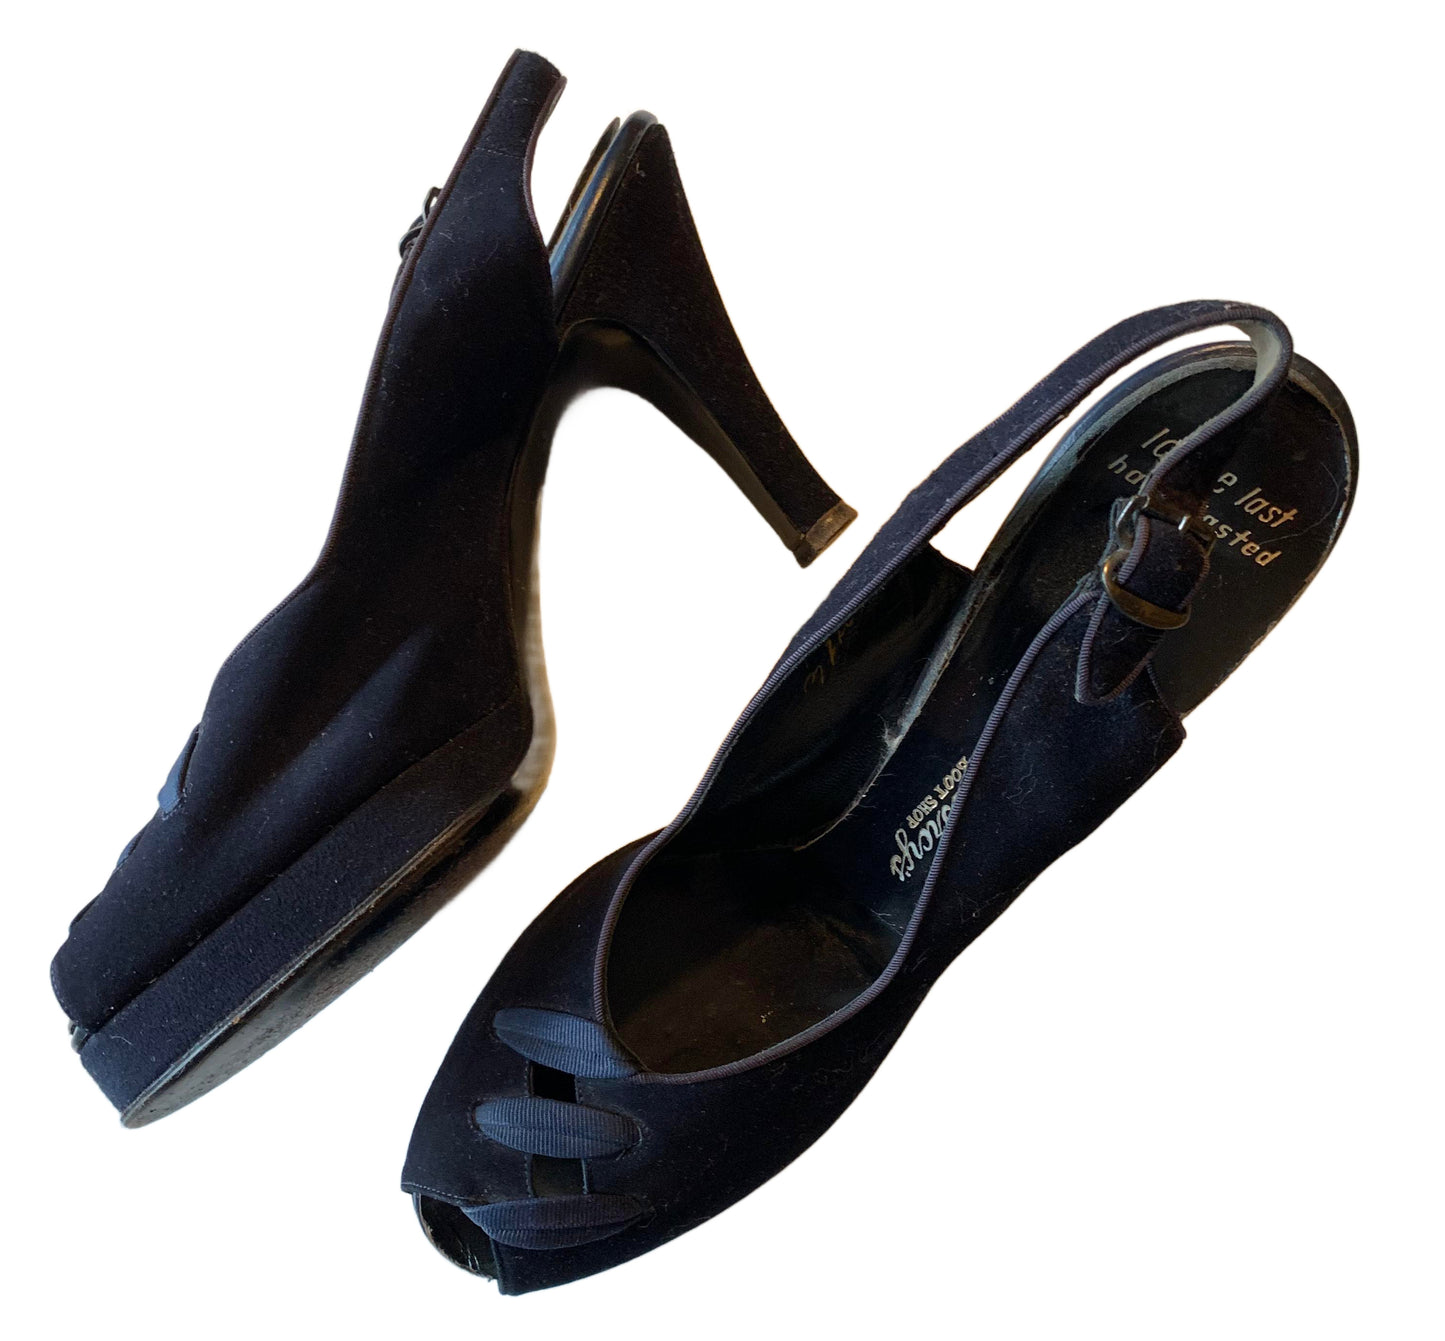 Midnight Blue Suede Platform Peep Toe Slingback Shoes with Ribbon Accents circa 1940s 8N